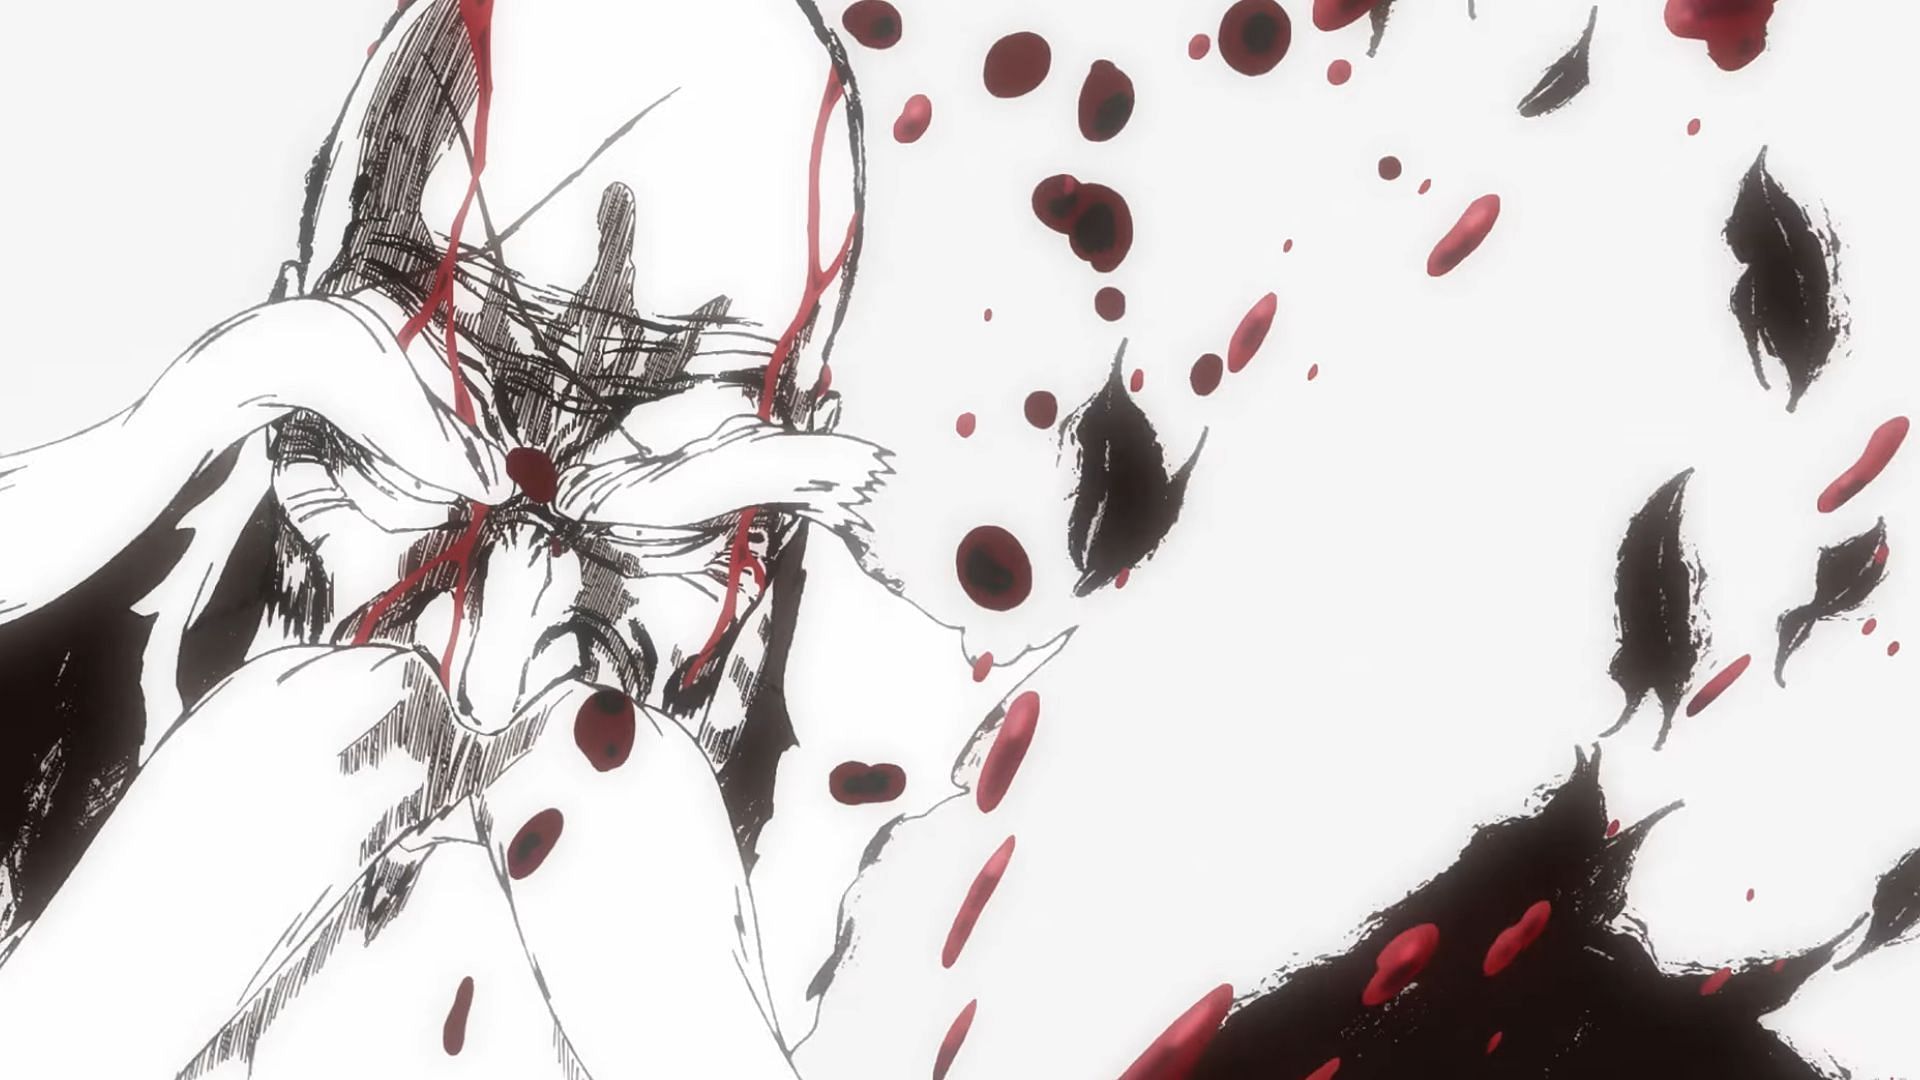 Yamamoto in his final moments in Bleach: Thousand-Year Blood War episode 6 (image via Studio Pierrot)